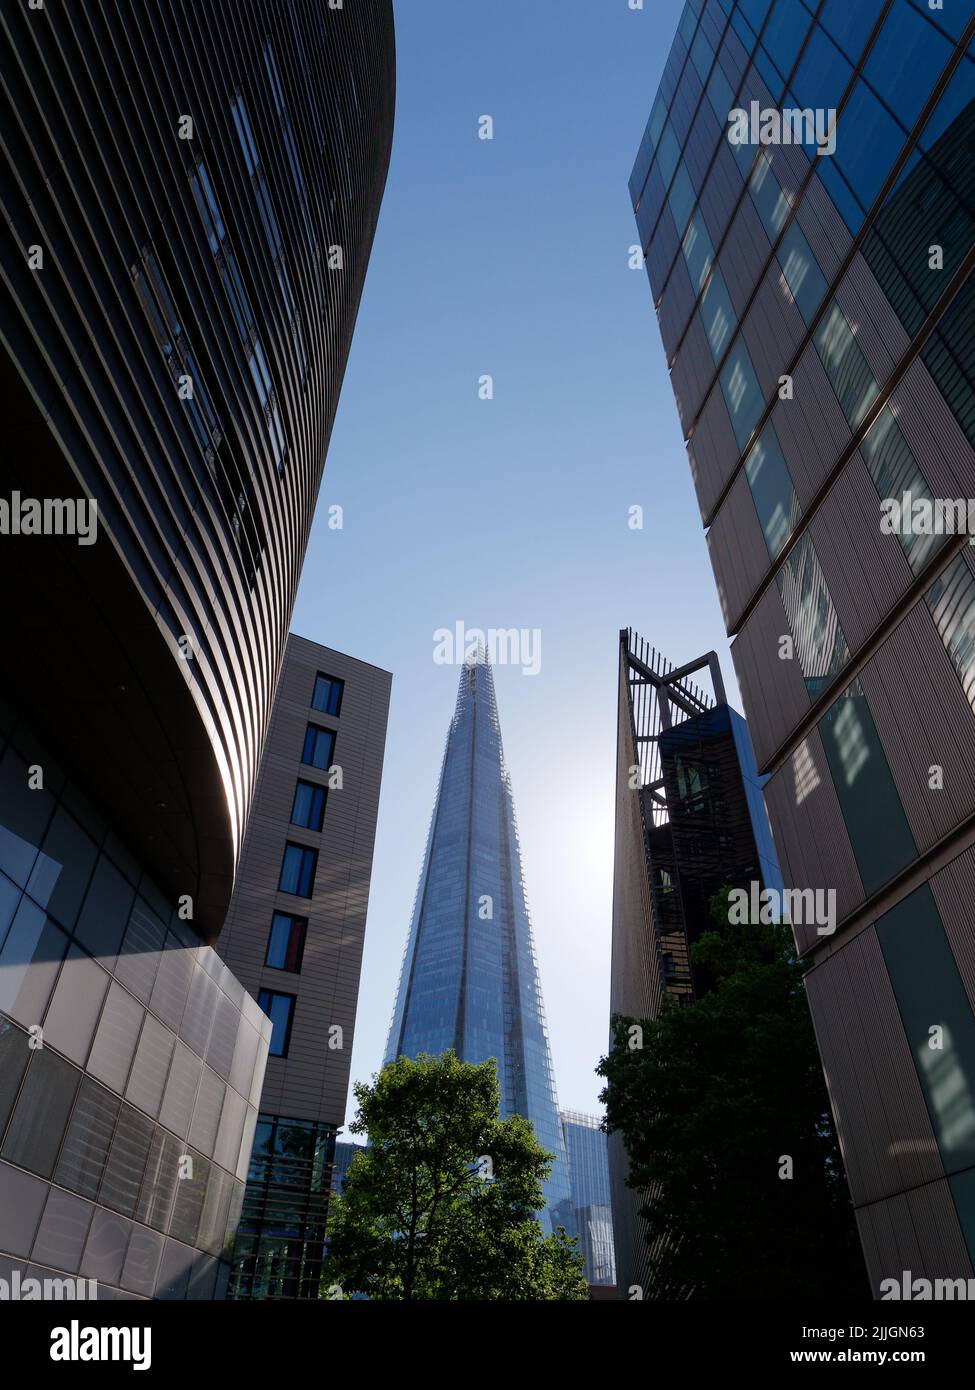 London, Greater London, England, June 22 2022: Looking through buildings on the south bank towards The Shard Skyscraper Stock Photo